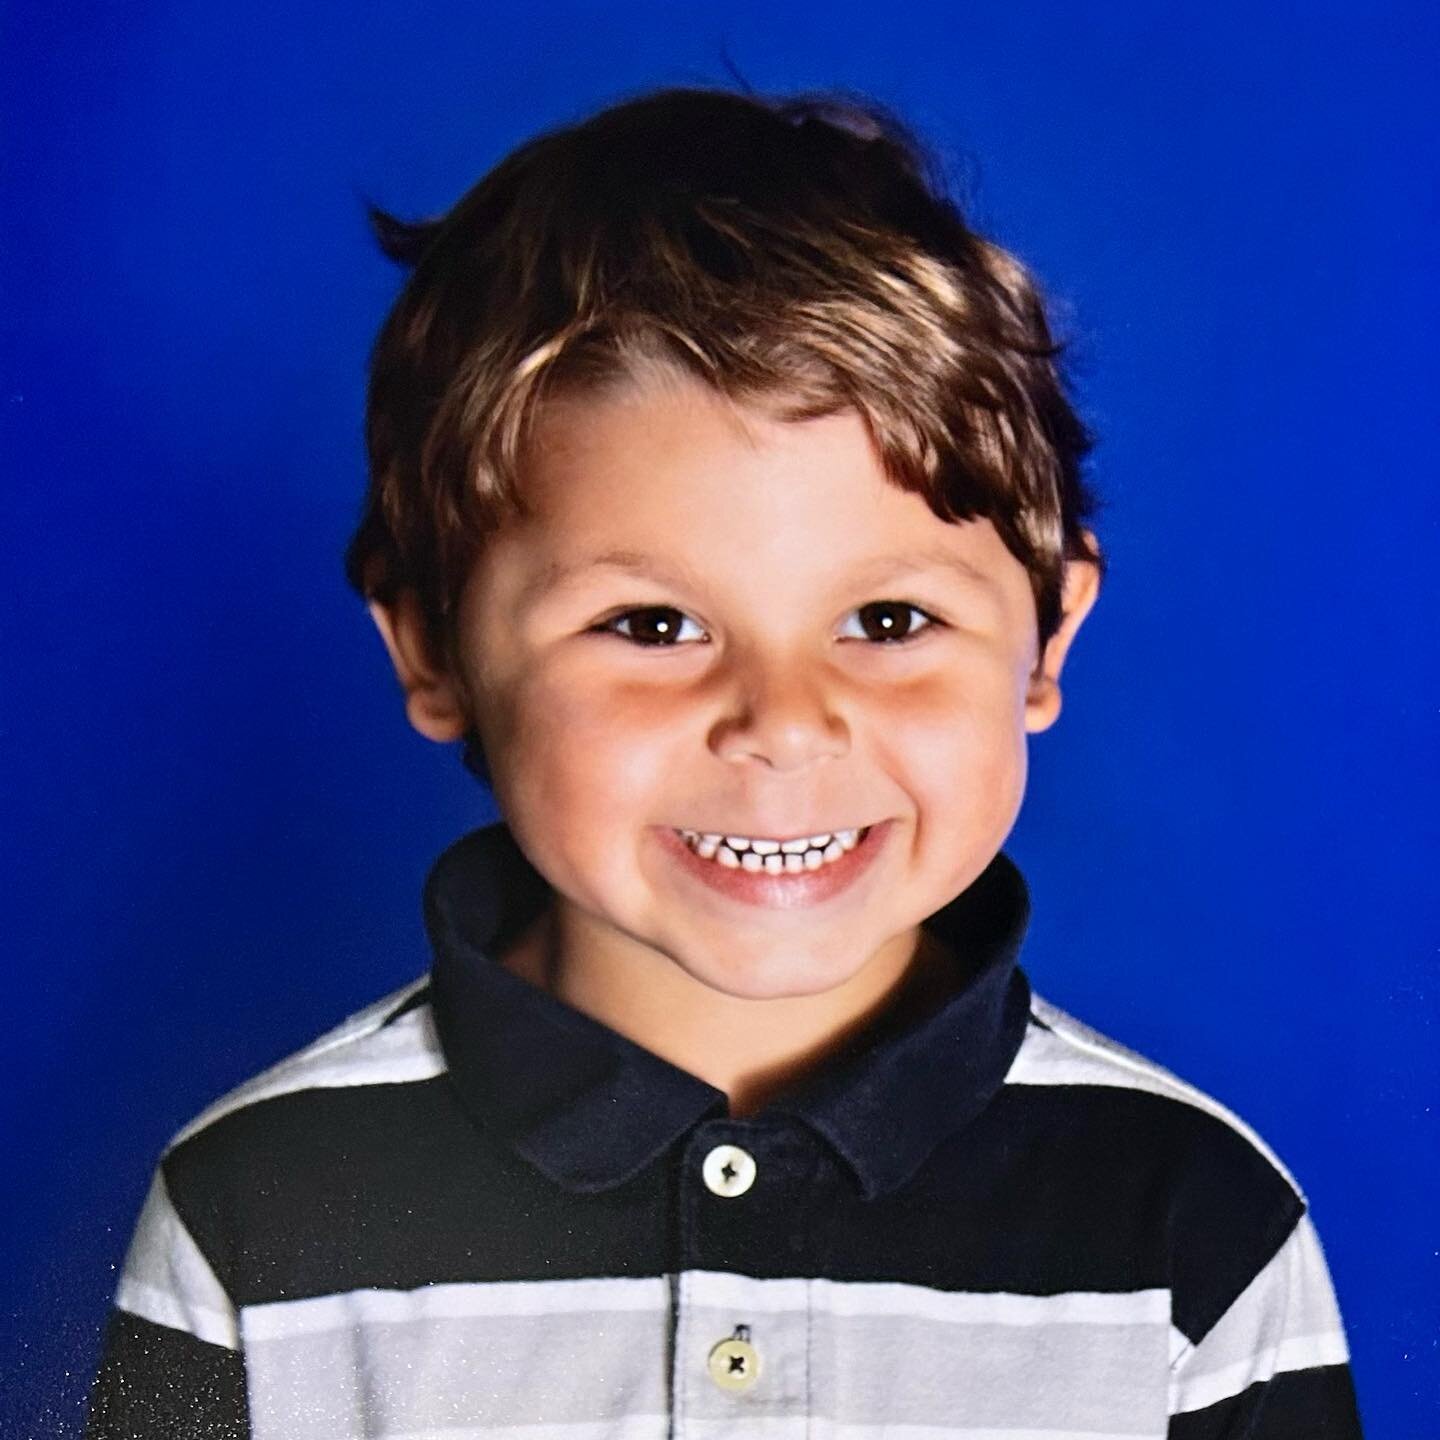 Felix&rsquo;s school pictures came in and he&rsquo;s looking like an adorable little troublemaker 😂❤️#kidsofinsta #classphoto #cutie #love